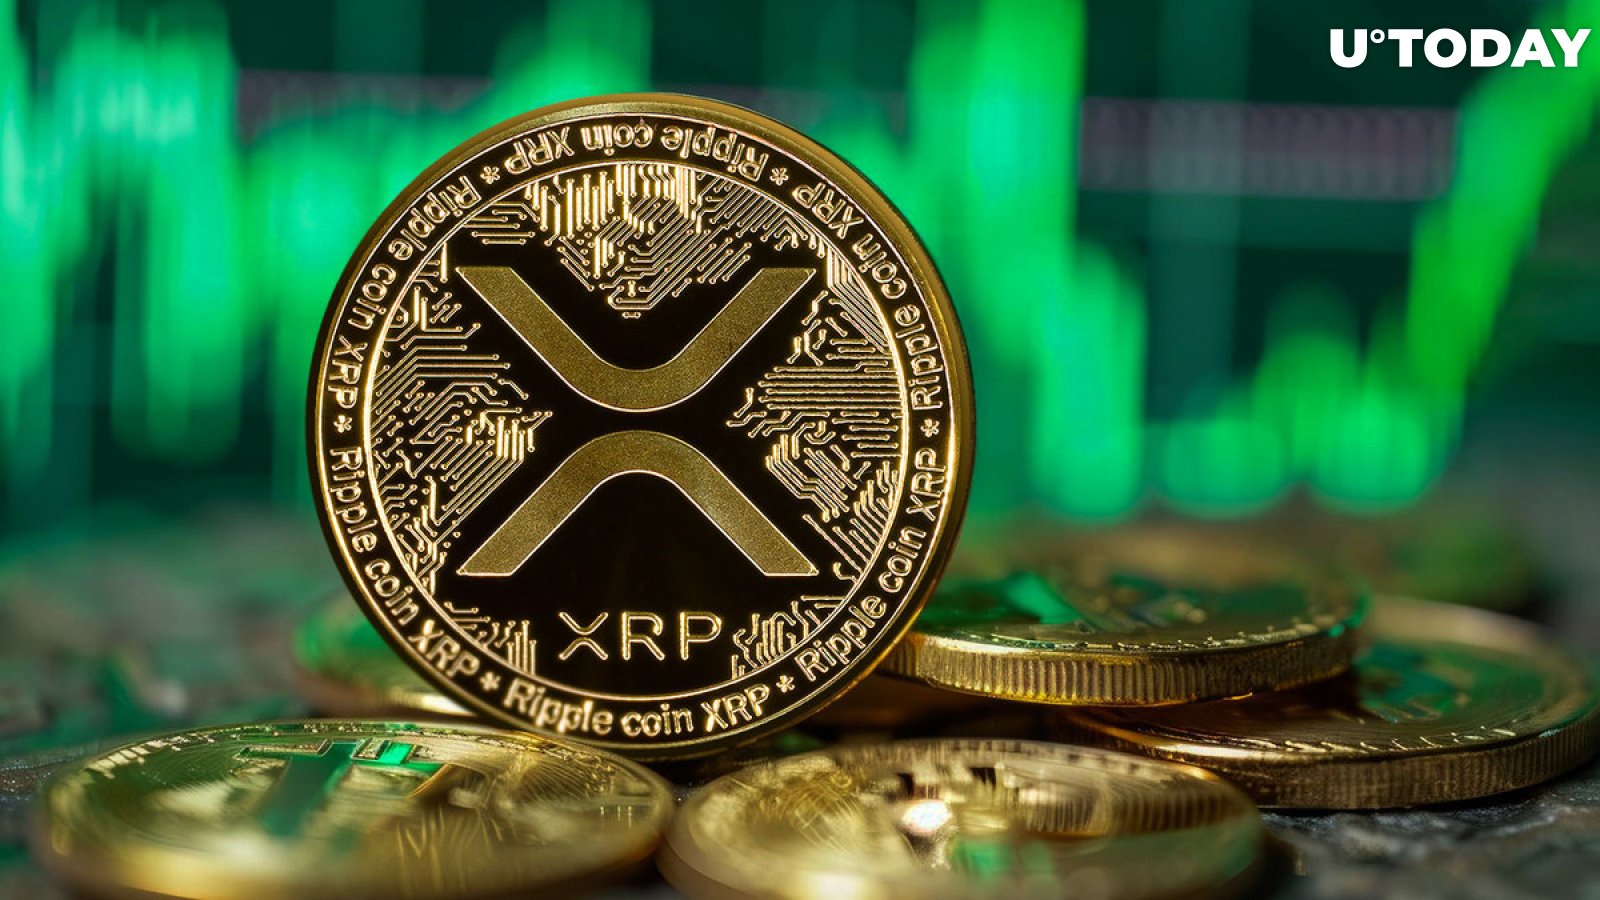 XRP Soars 91% in Volume as XRP Price Goes Crazy